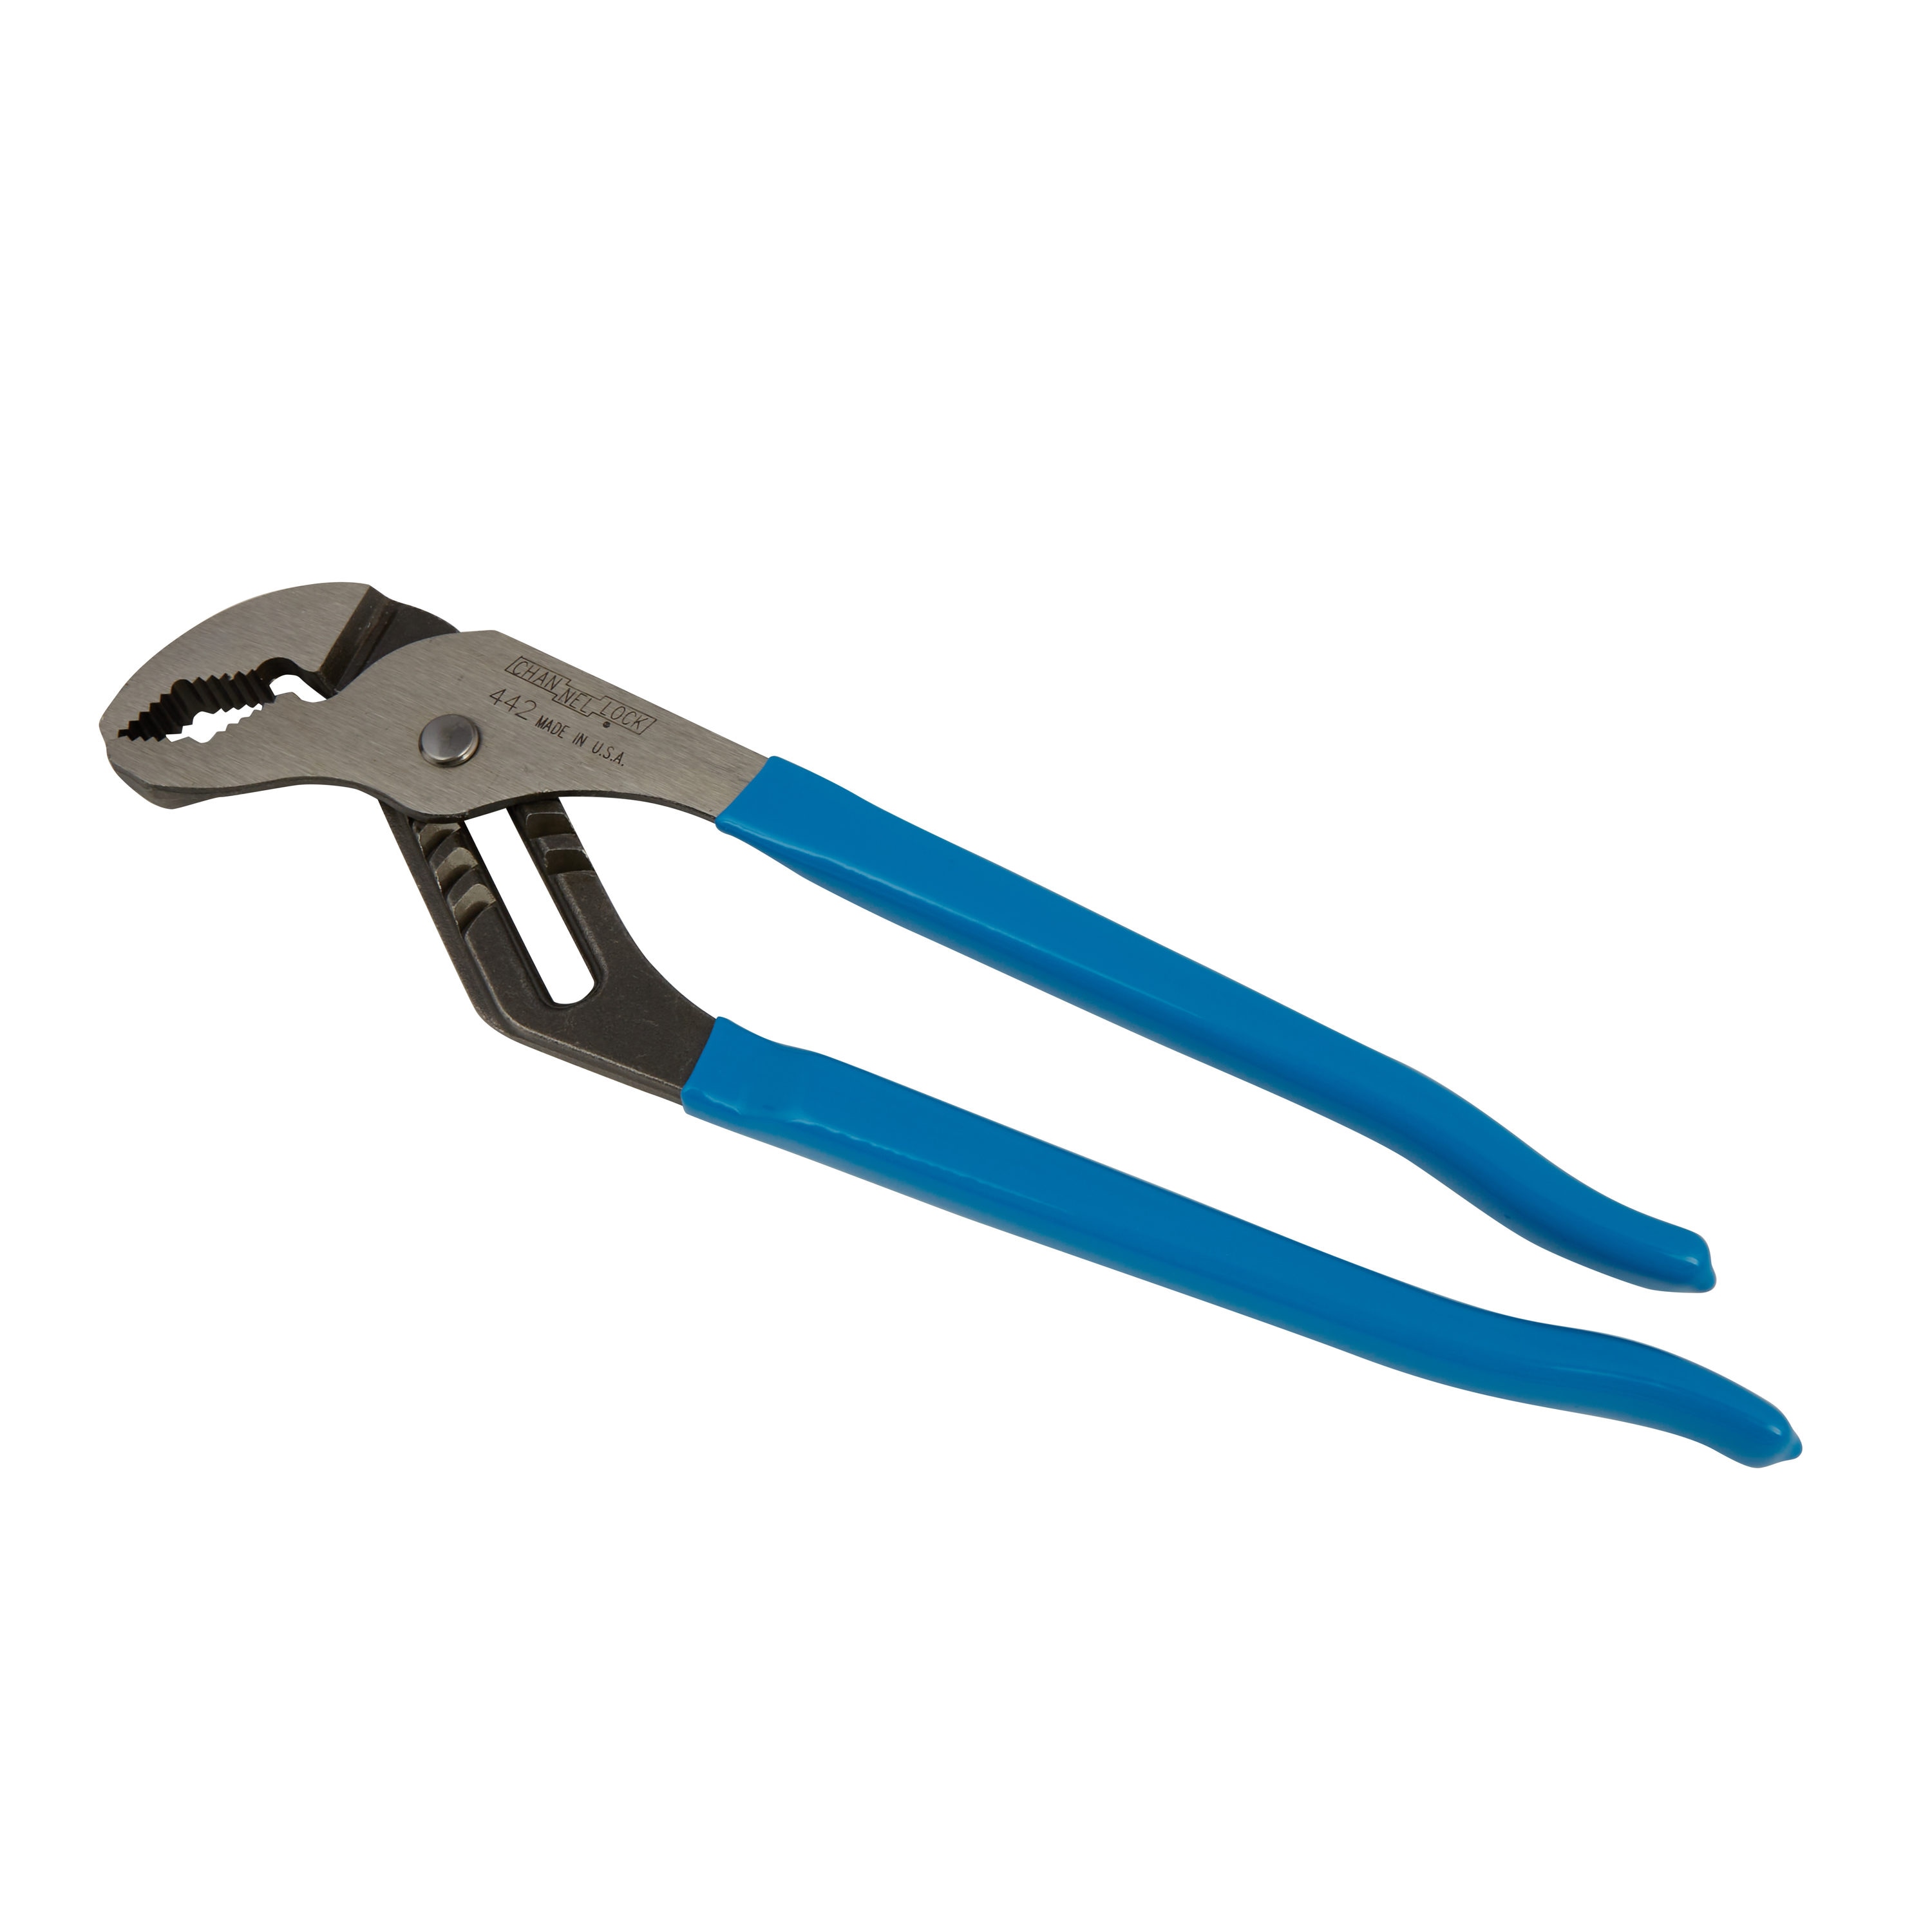 Channellock 442 - 12 V-Jaw Tongue & Groove Pliers